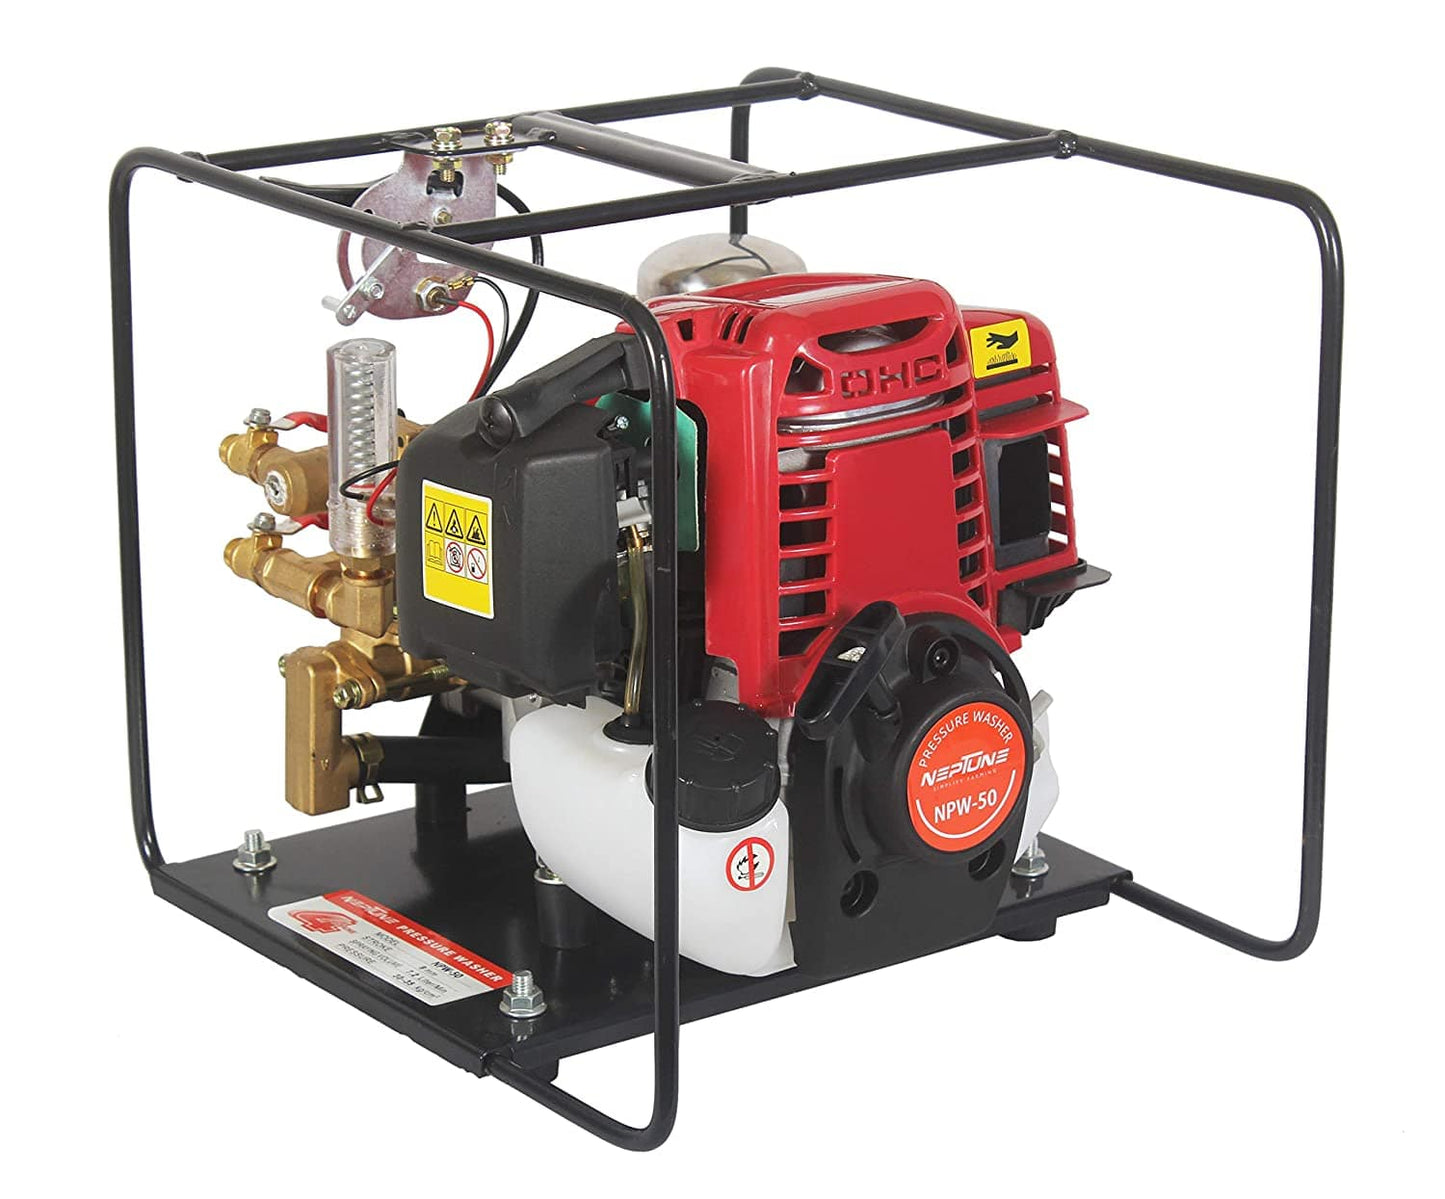 Neptune Simplify Farming Portable Power Sprayer 4 Stroke Engine Technology Brass Pressure Pump with Double Discharge Outlet NPW-50